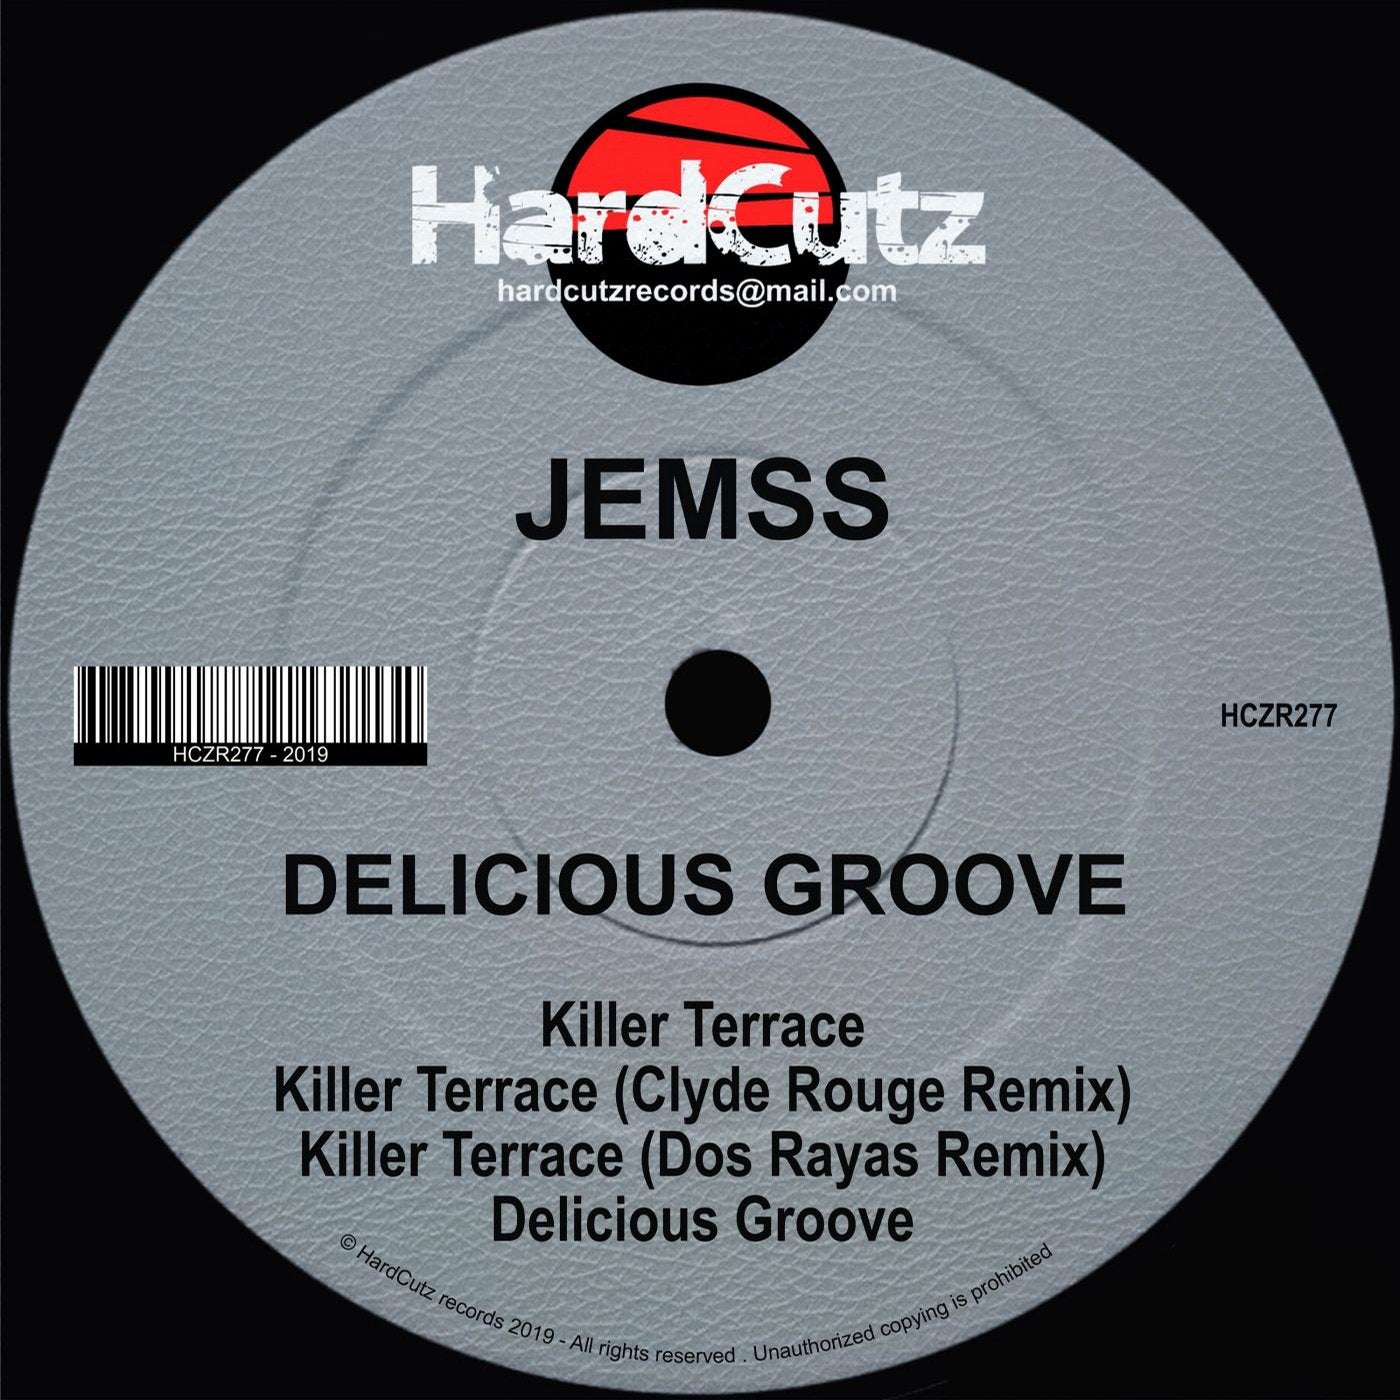 Delicious Groove